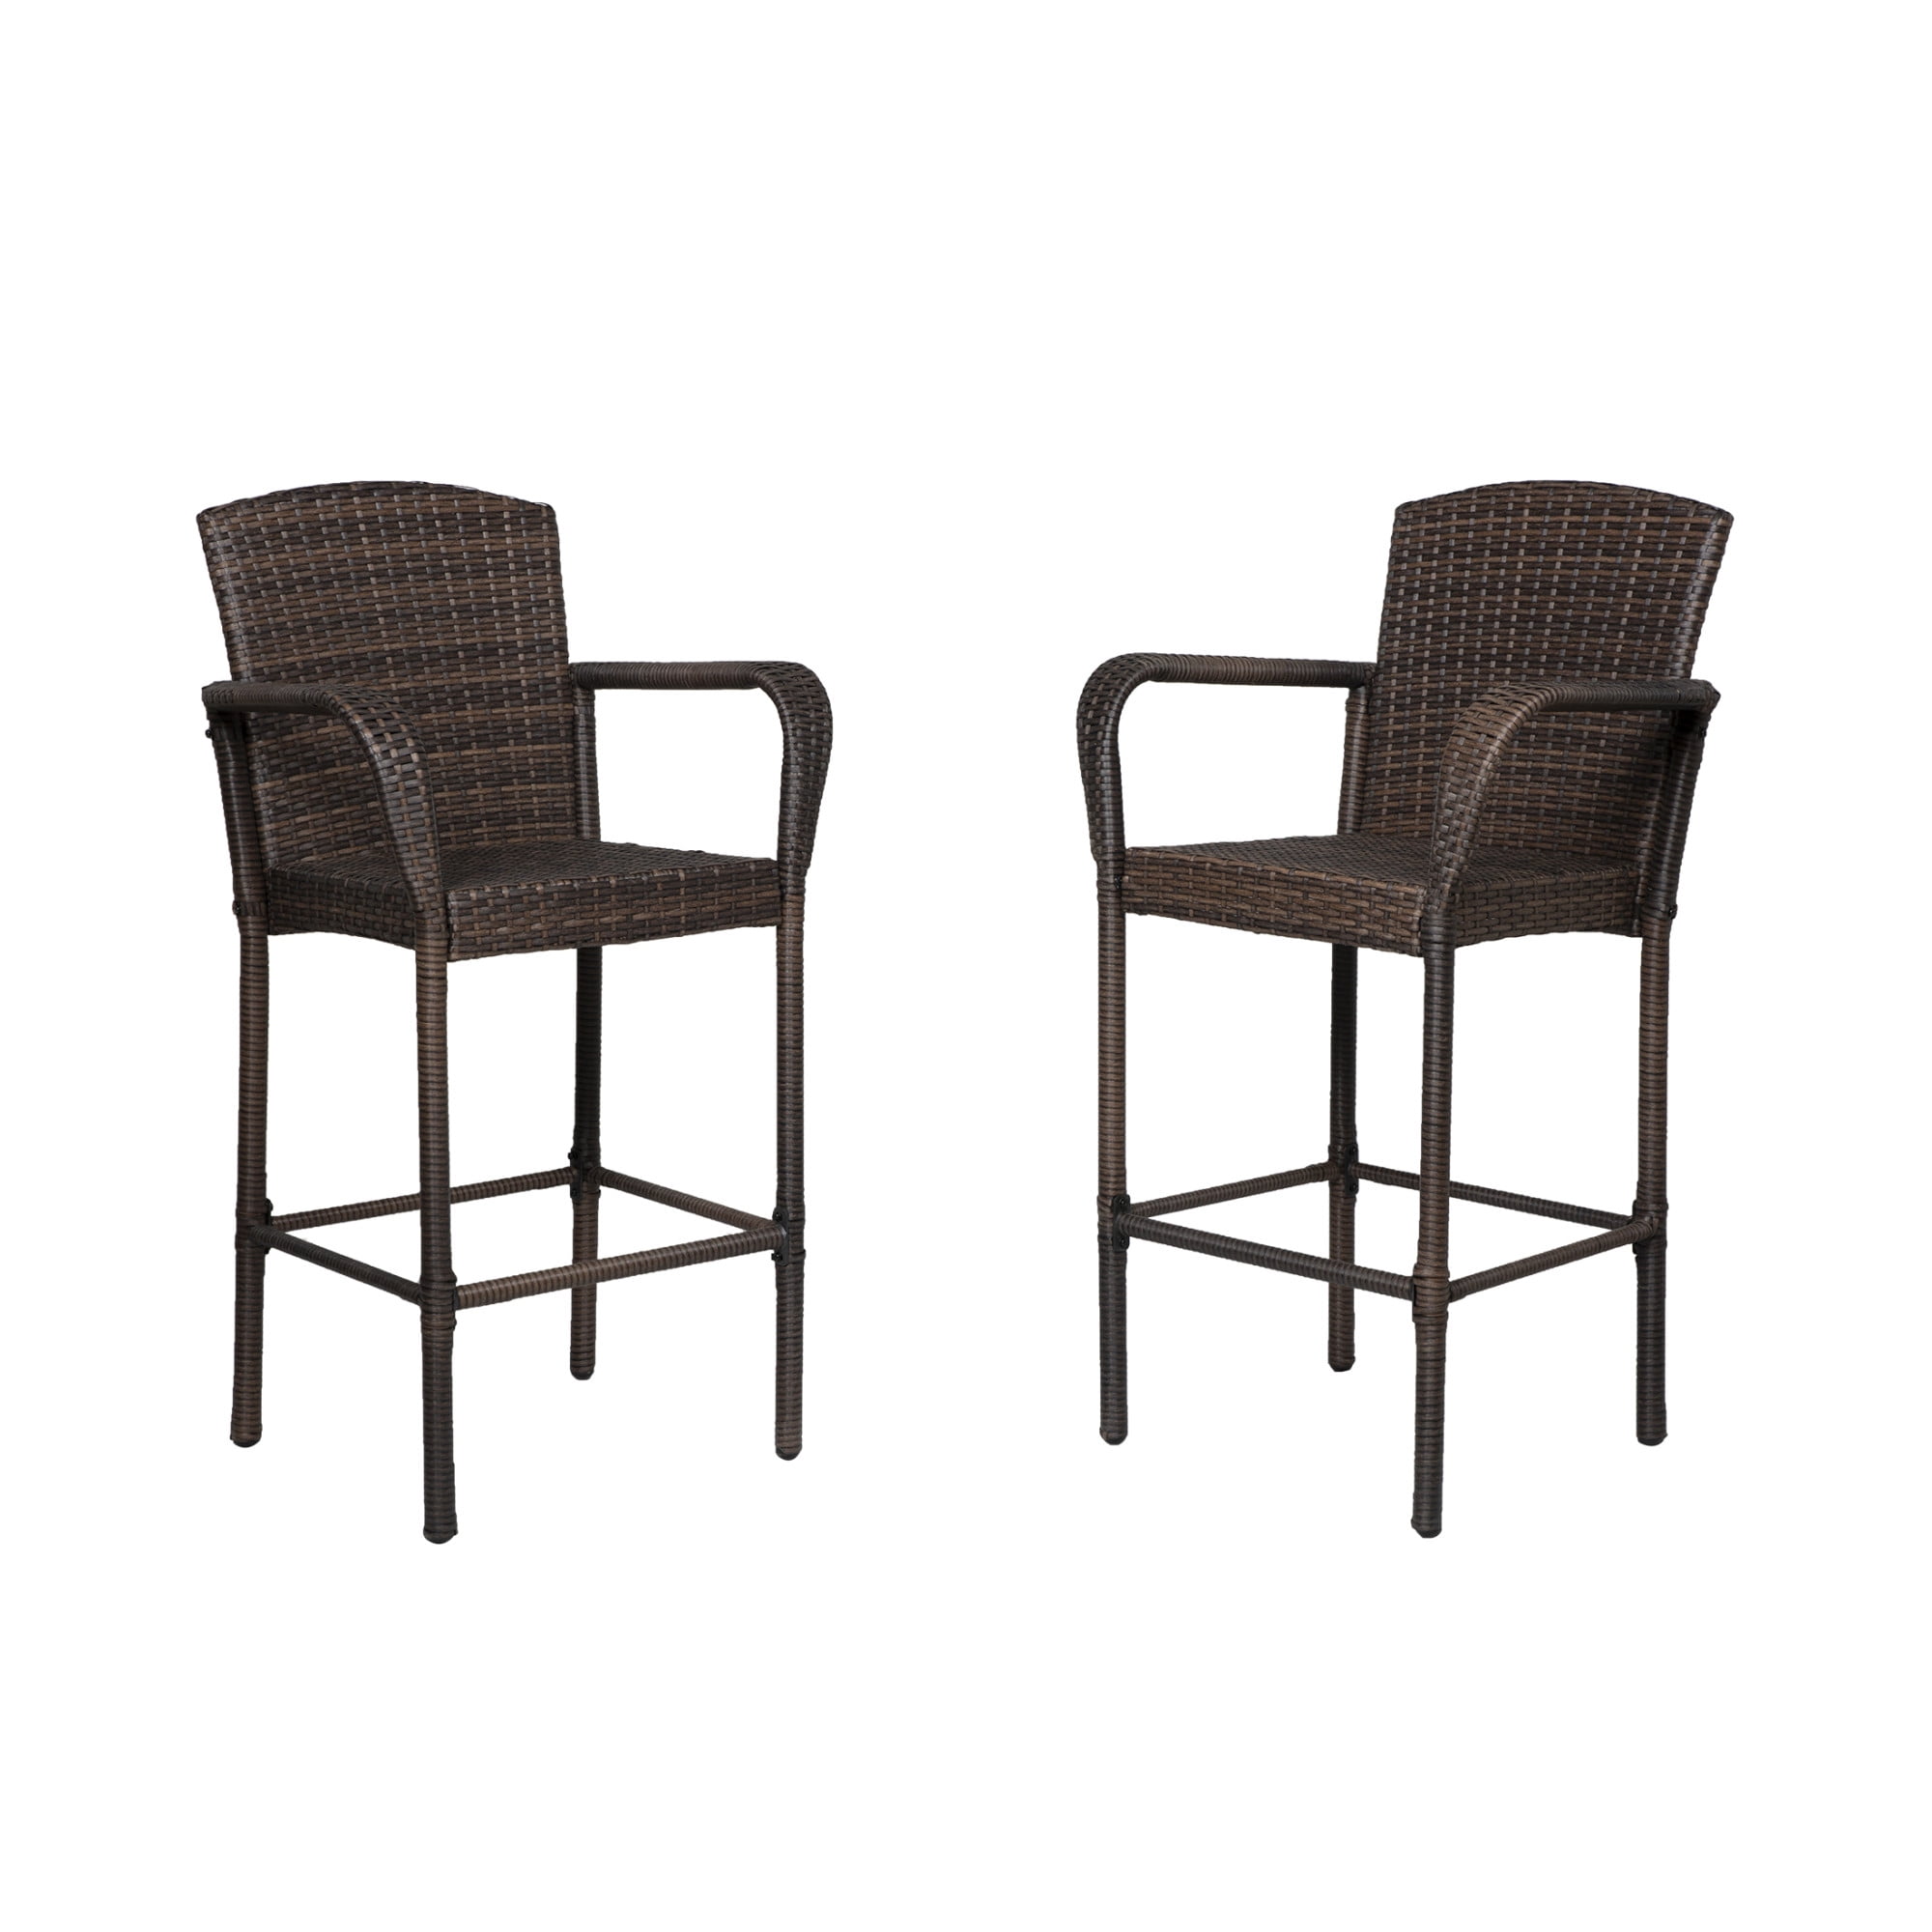 Crosley Furniture Bradenton Outdoor Wicker 29-inch Bar Stools Weathered Brown with Sand Cushions Set of 2 